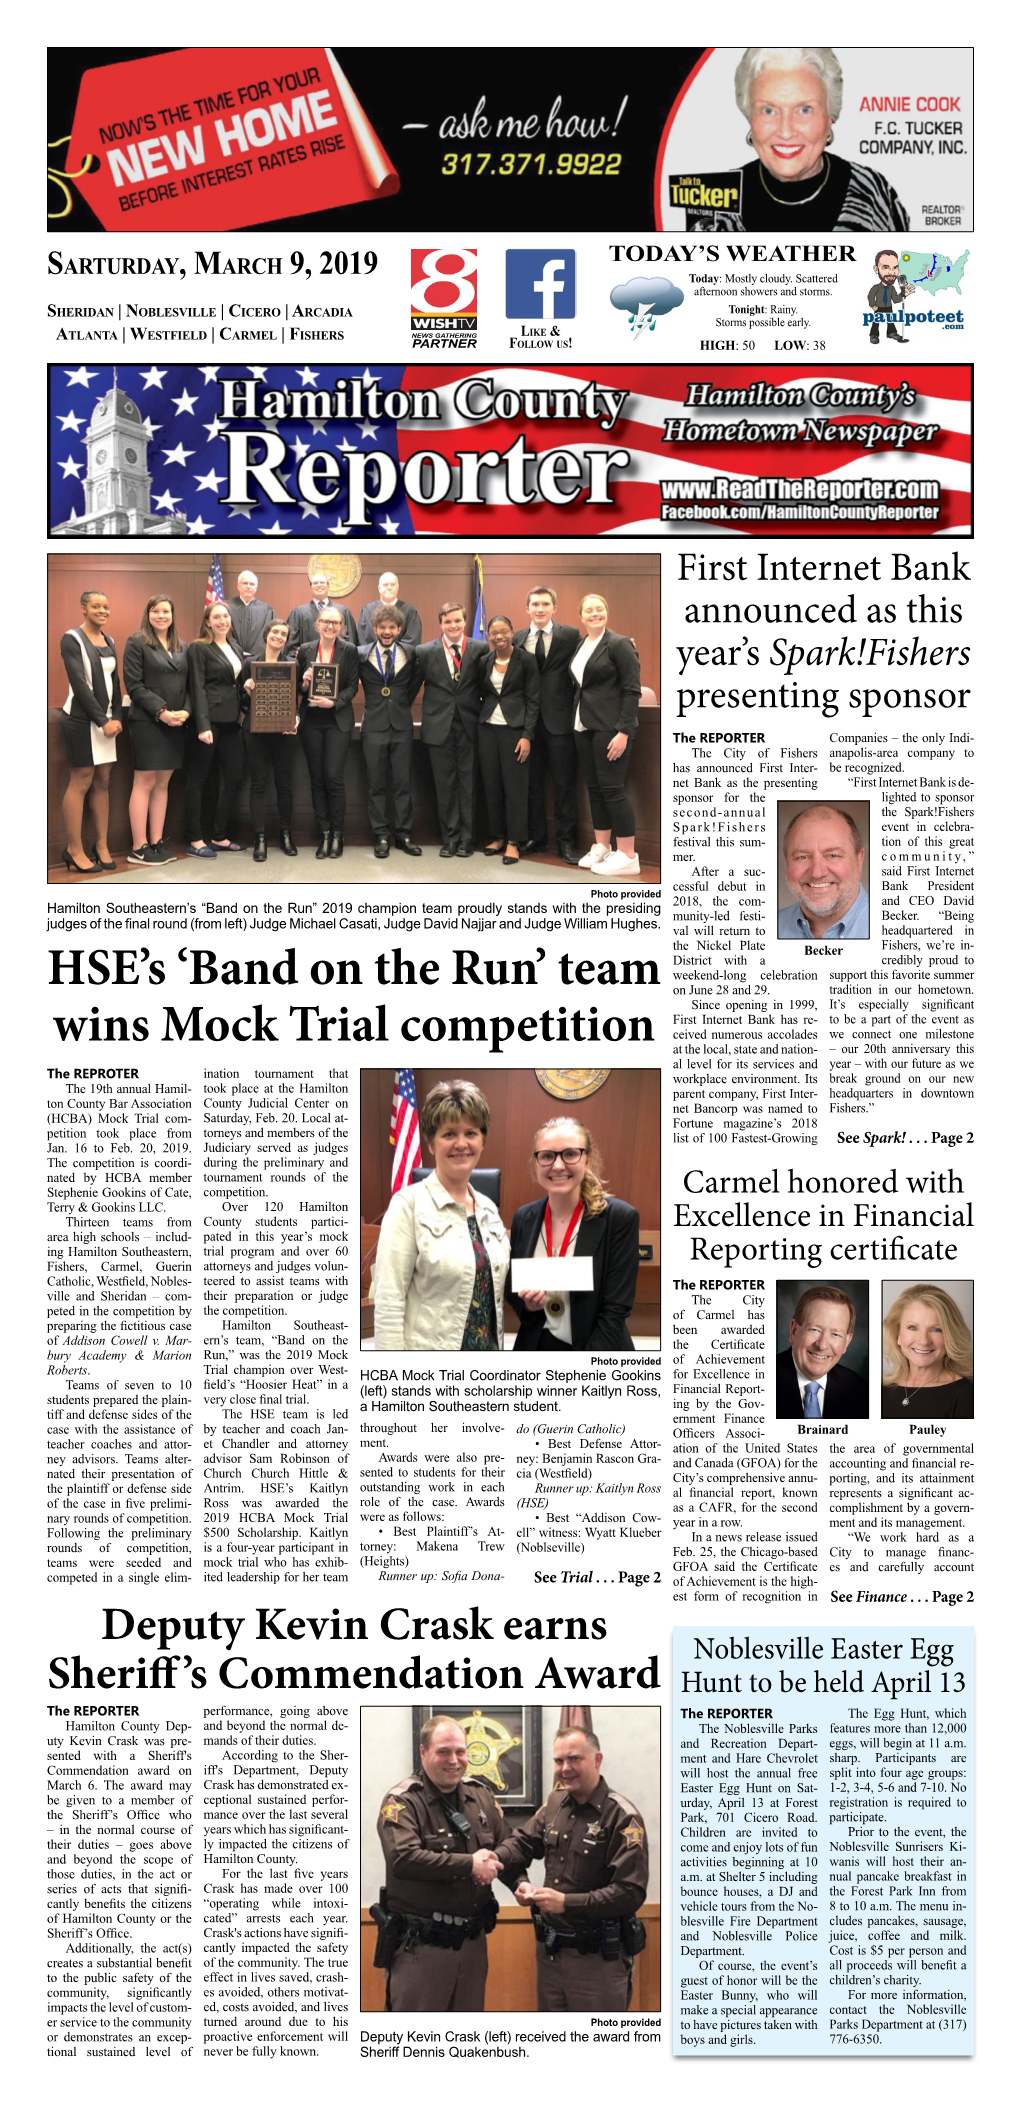 HSE's 'Band on the Run' Team Wins Mock Trial Competition